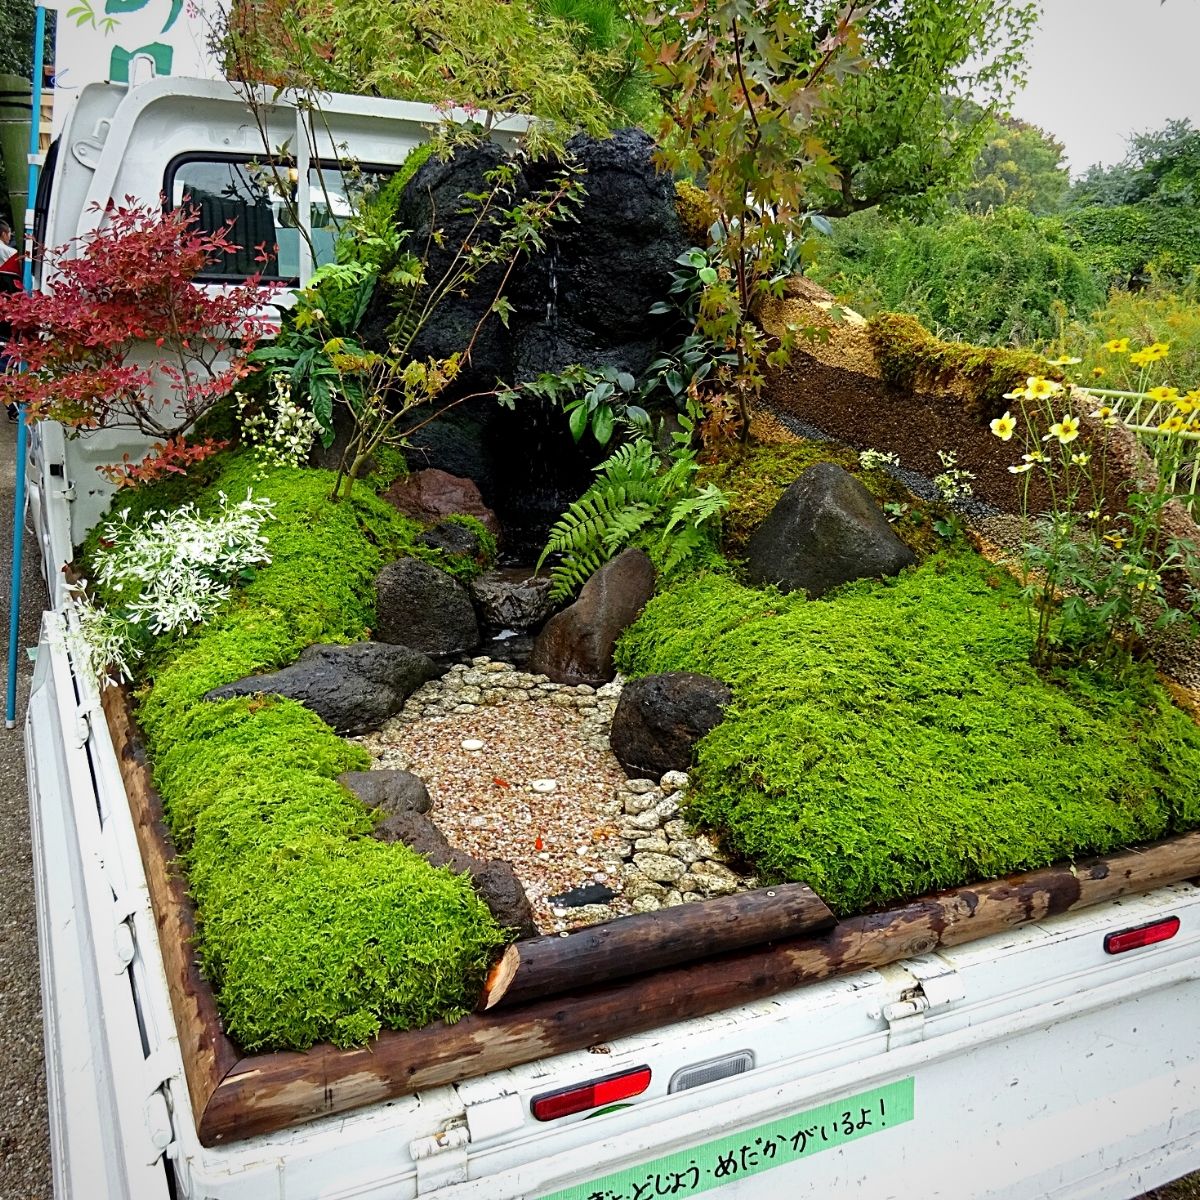 Garden on the back of a kei tora truck